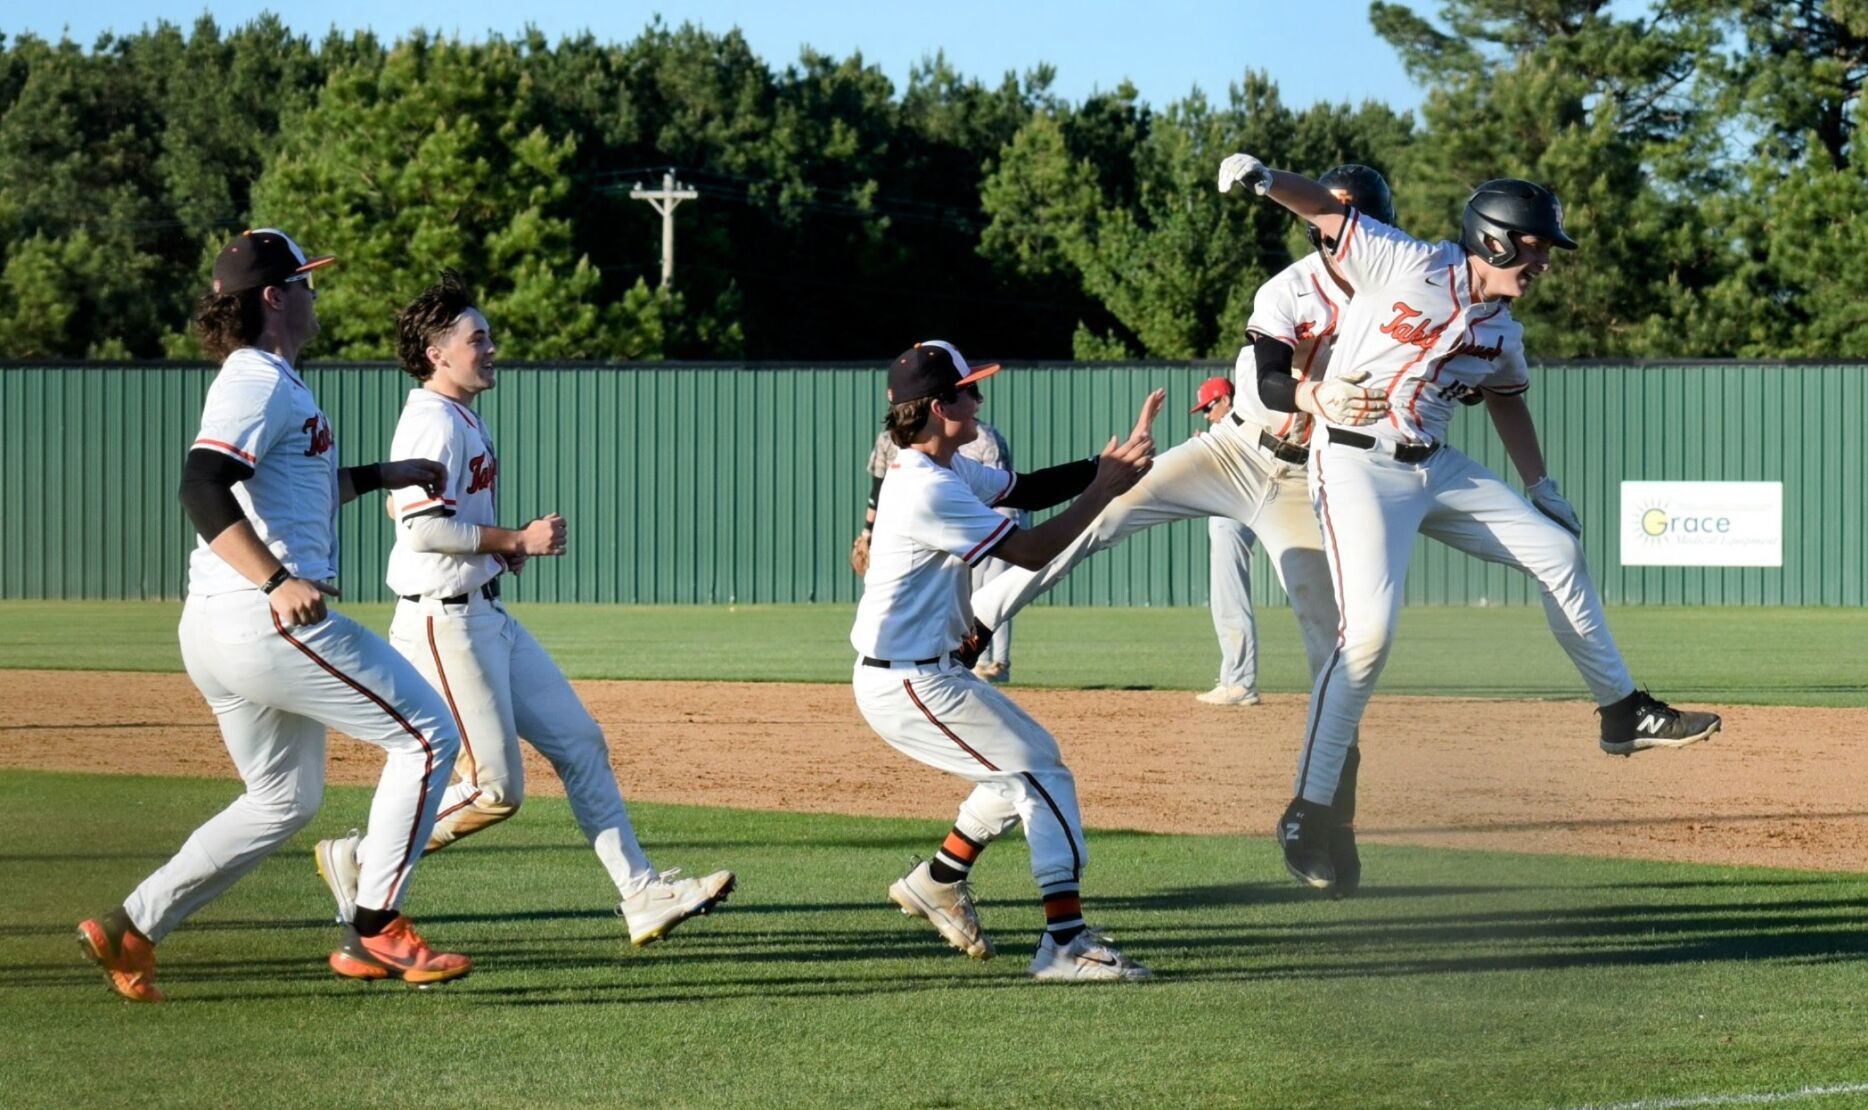 DIAMOND READY: Tigers tone up for Regionals with win